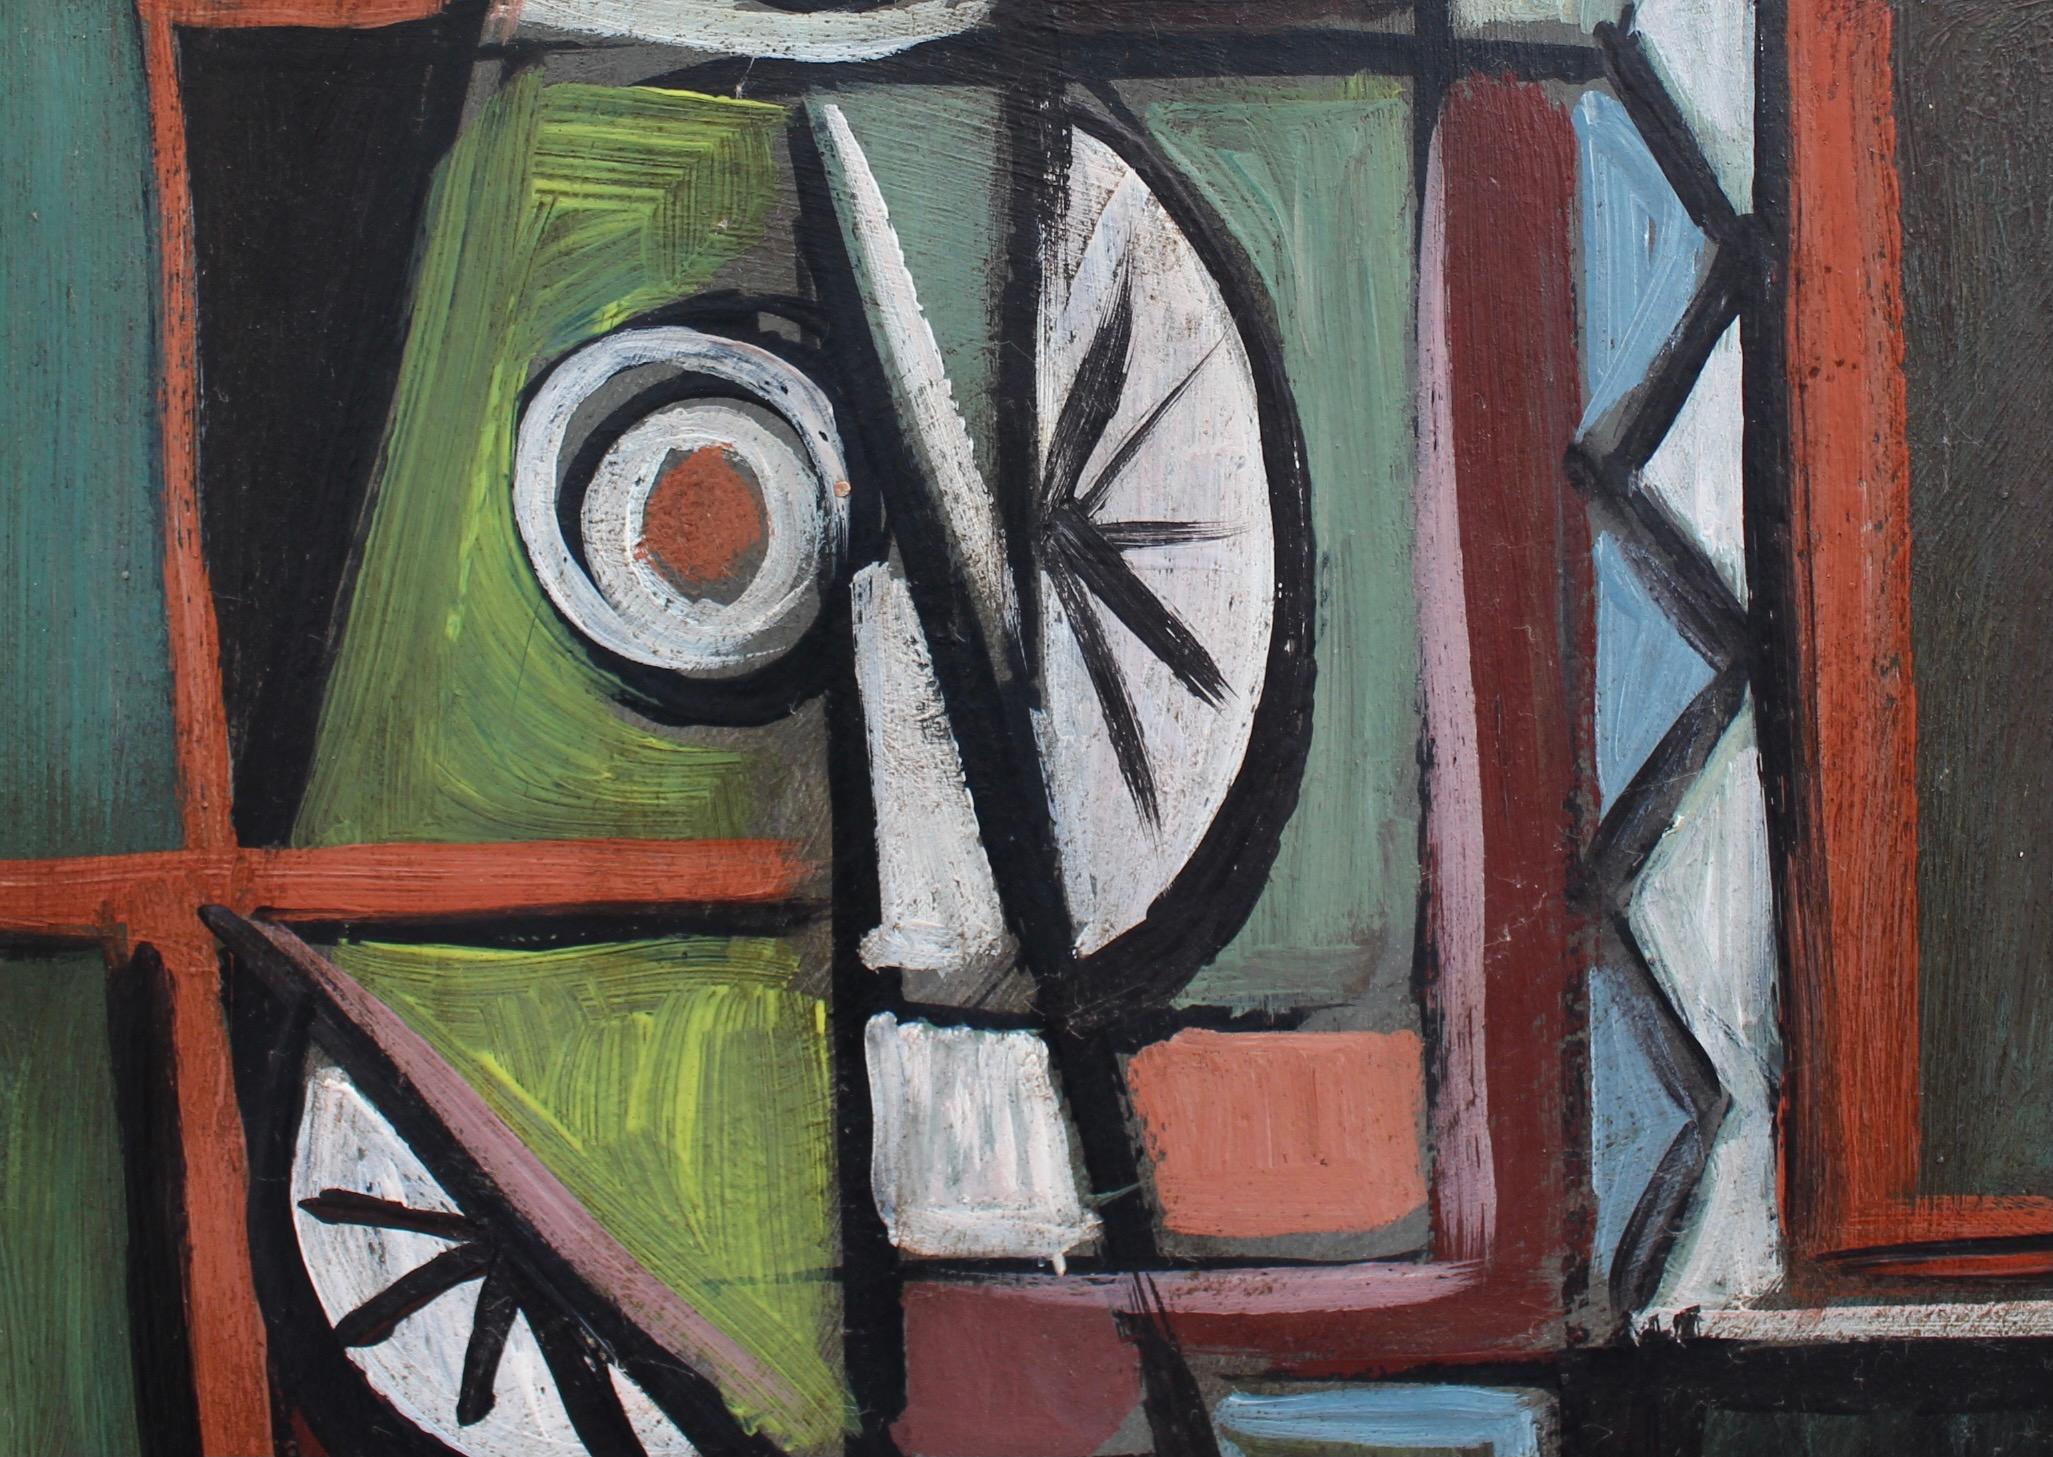 'Cubist Composition in Colour', oil on board, by STM (circa 1970s). A vibrant modern painting inspired by Picasso and Braque, the artist uses angles, lines and vibrant colours to create an entirely new dimension to painting. Cubists abandoned